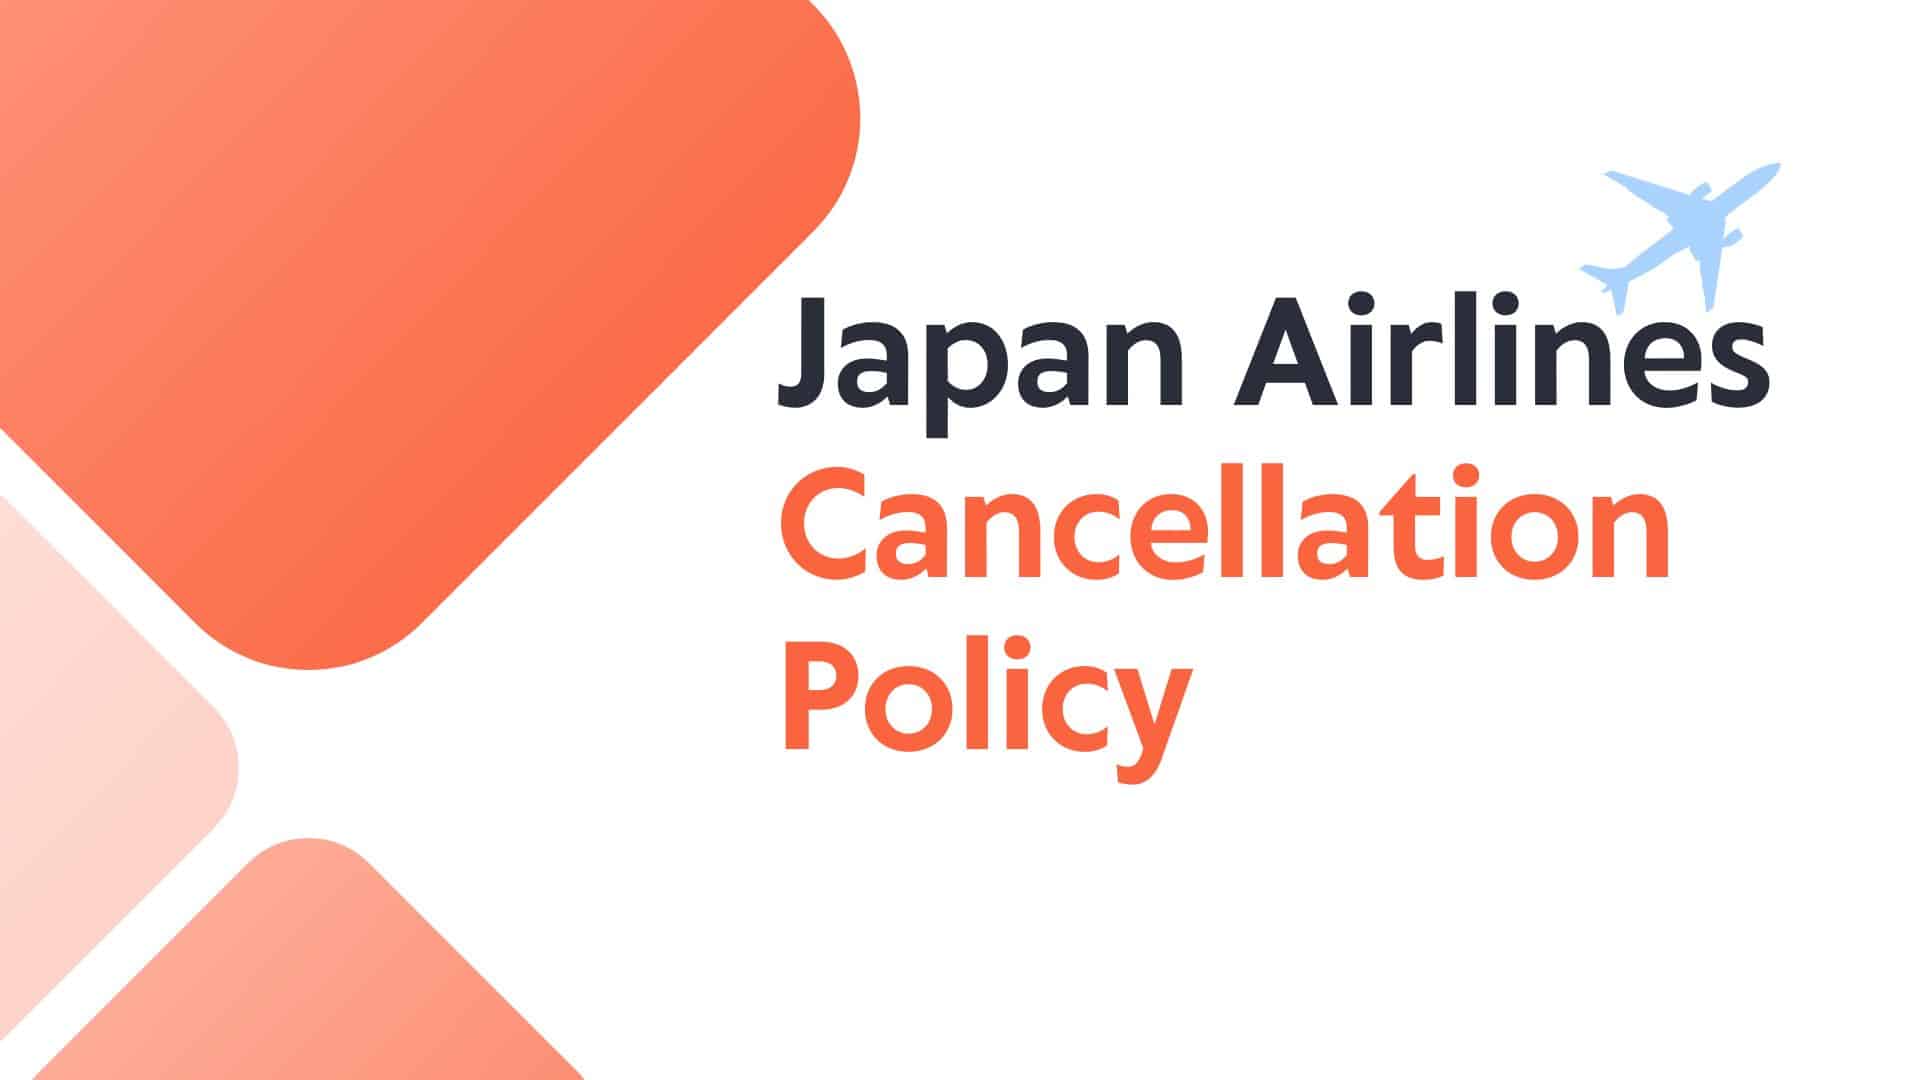 Japan Airlines Cancellation Policy641a98c34d583.jpg